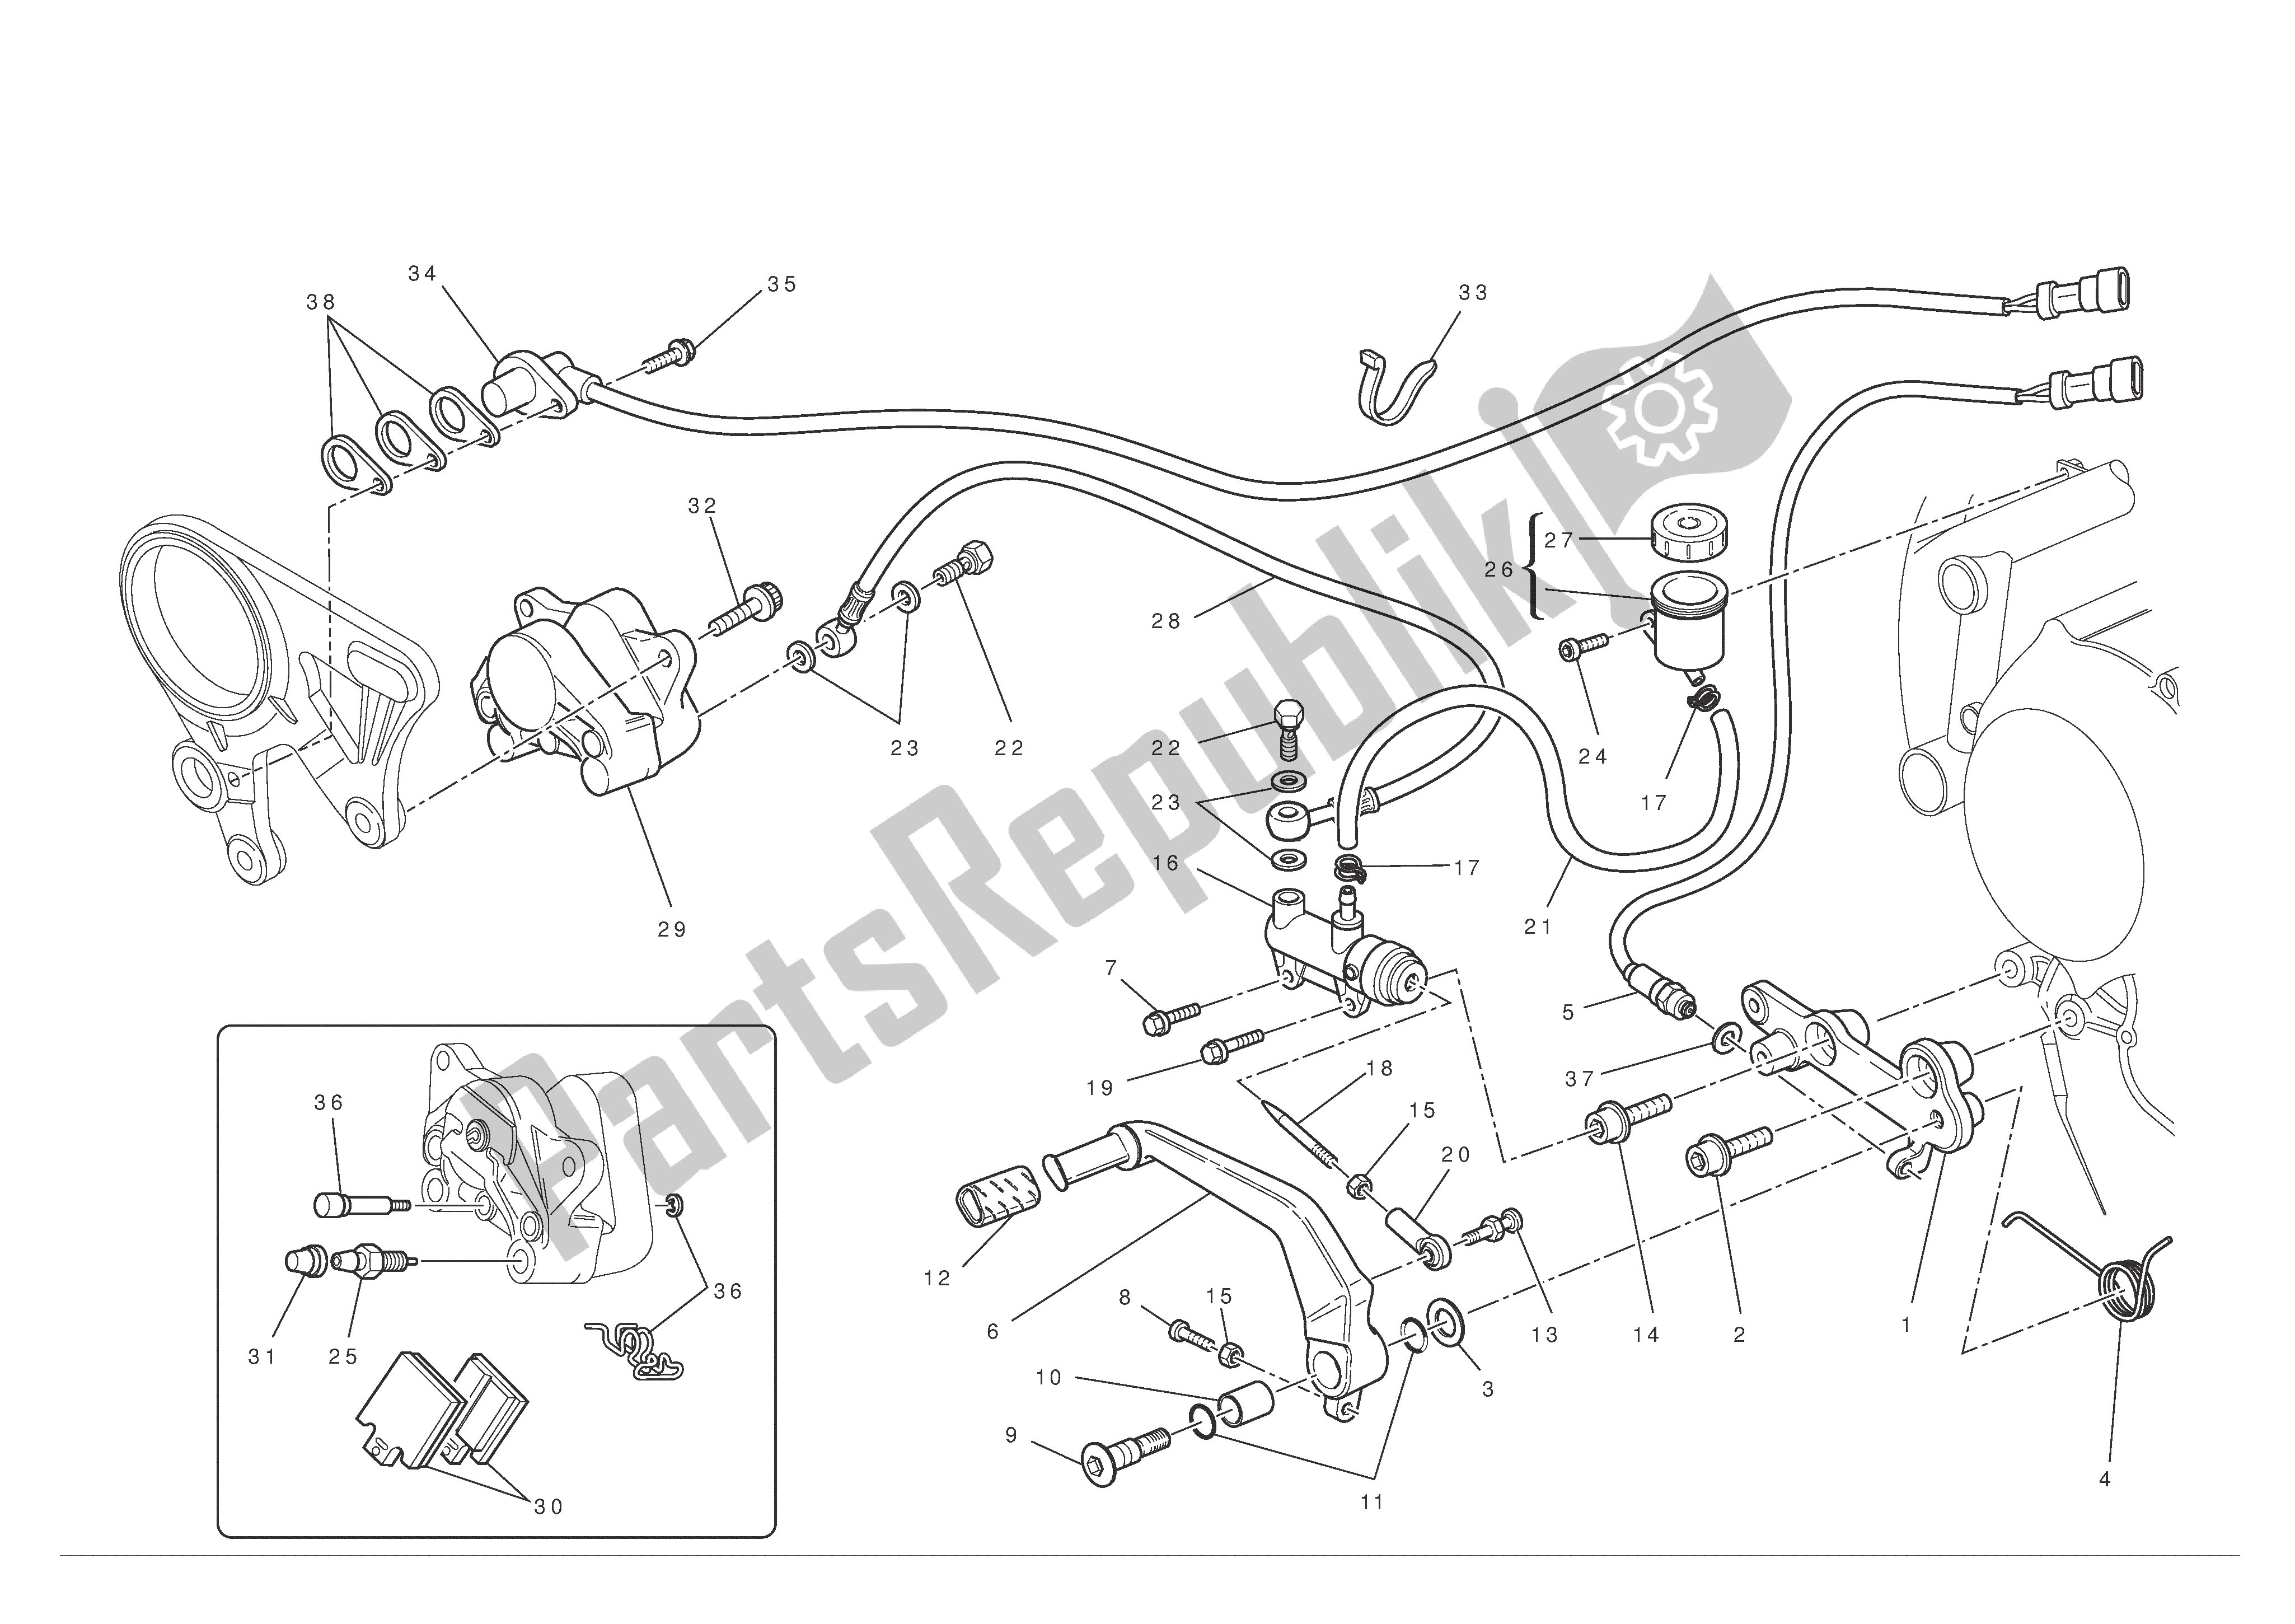 All parts for the Rear Brake of the Ducati 1198 SP 2011